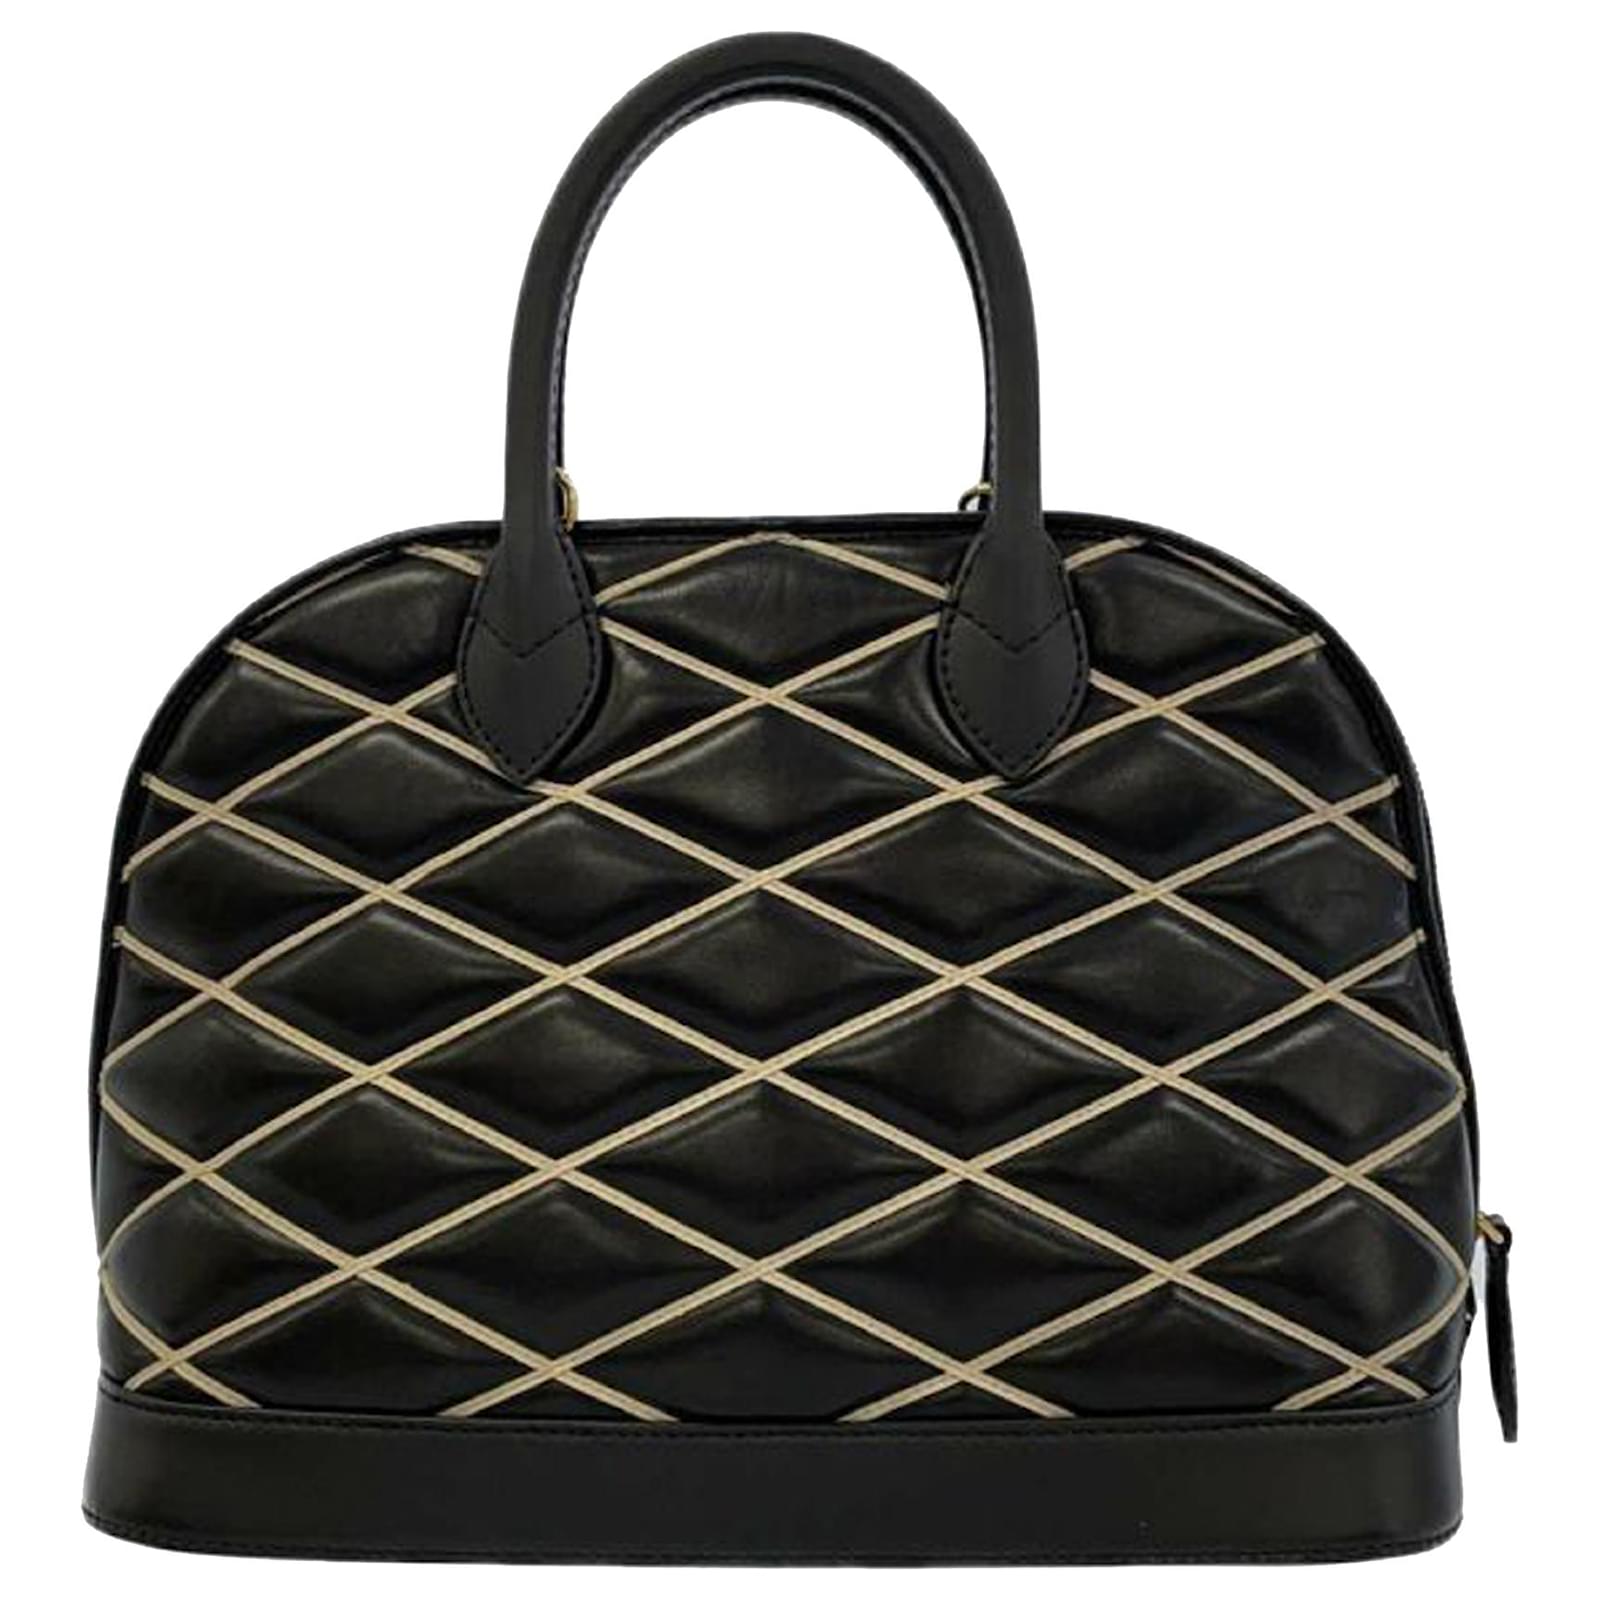 Louis Vuitton Malletage Alma Pm Quilted Black Satchel Runway Limited  Edition